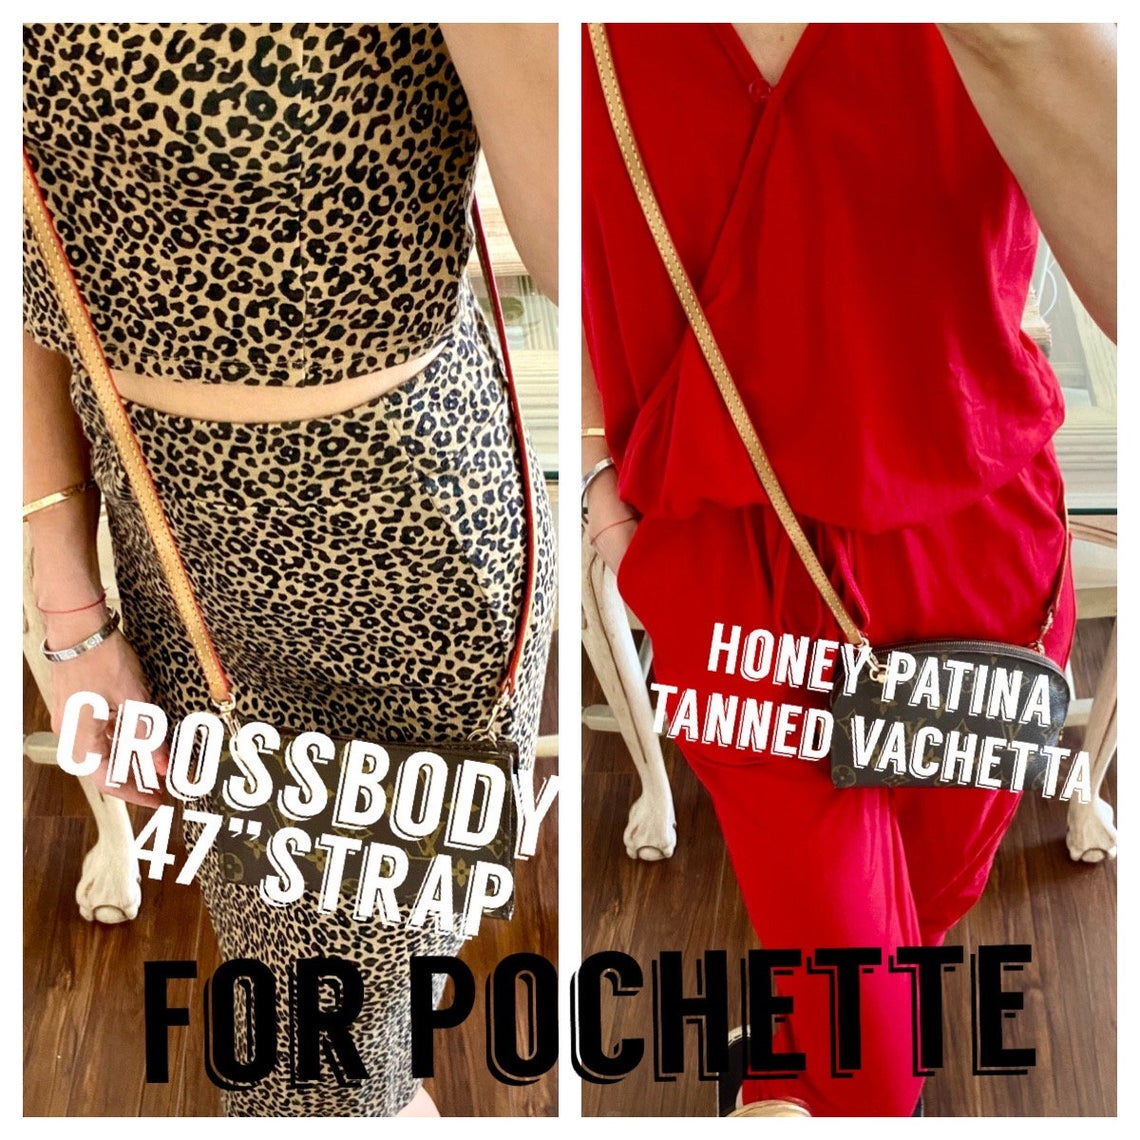 Crossbody Strap Replacement - Natural Vachetta Leather or Custom Honey Tanning Handmade Patina - For Pochette Clutch and Small luxury Purses - Sexy Little Vintage